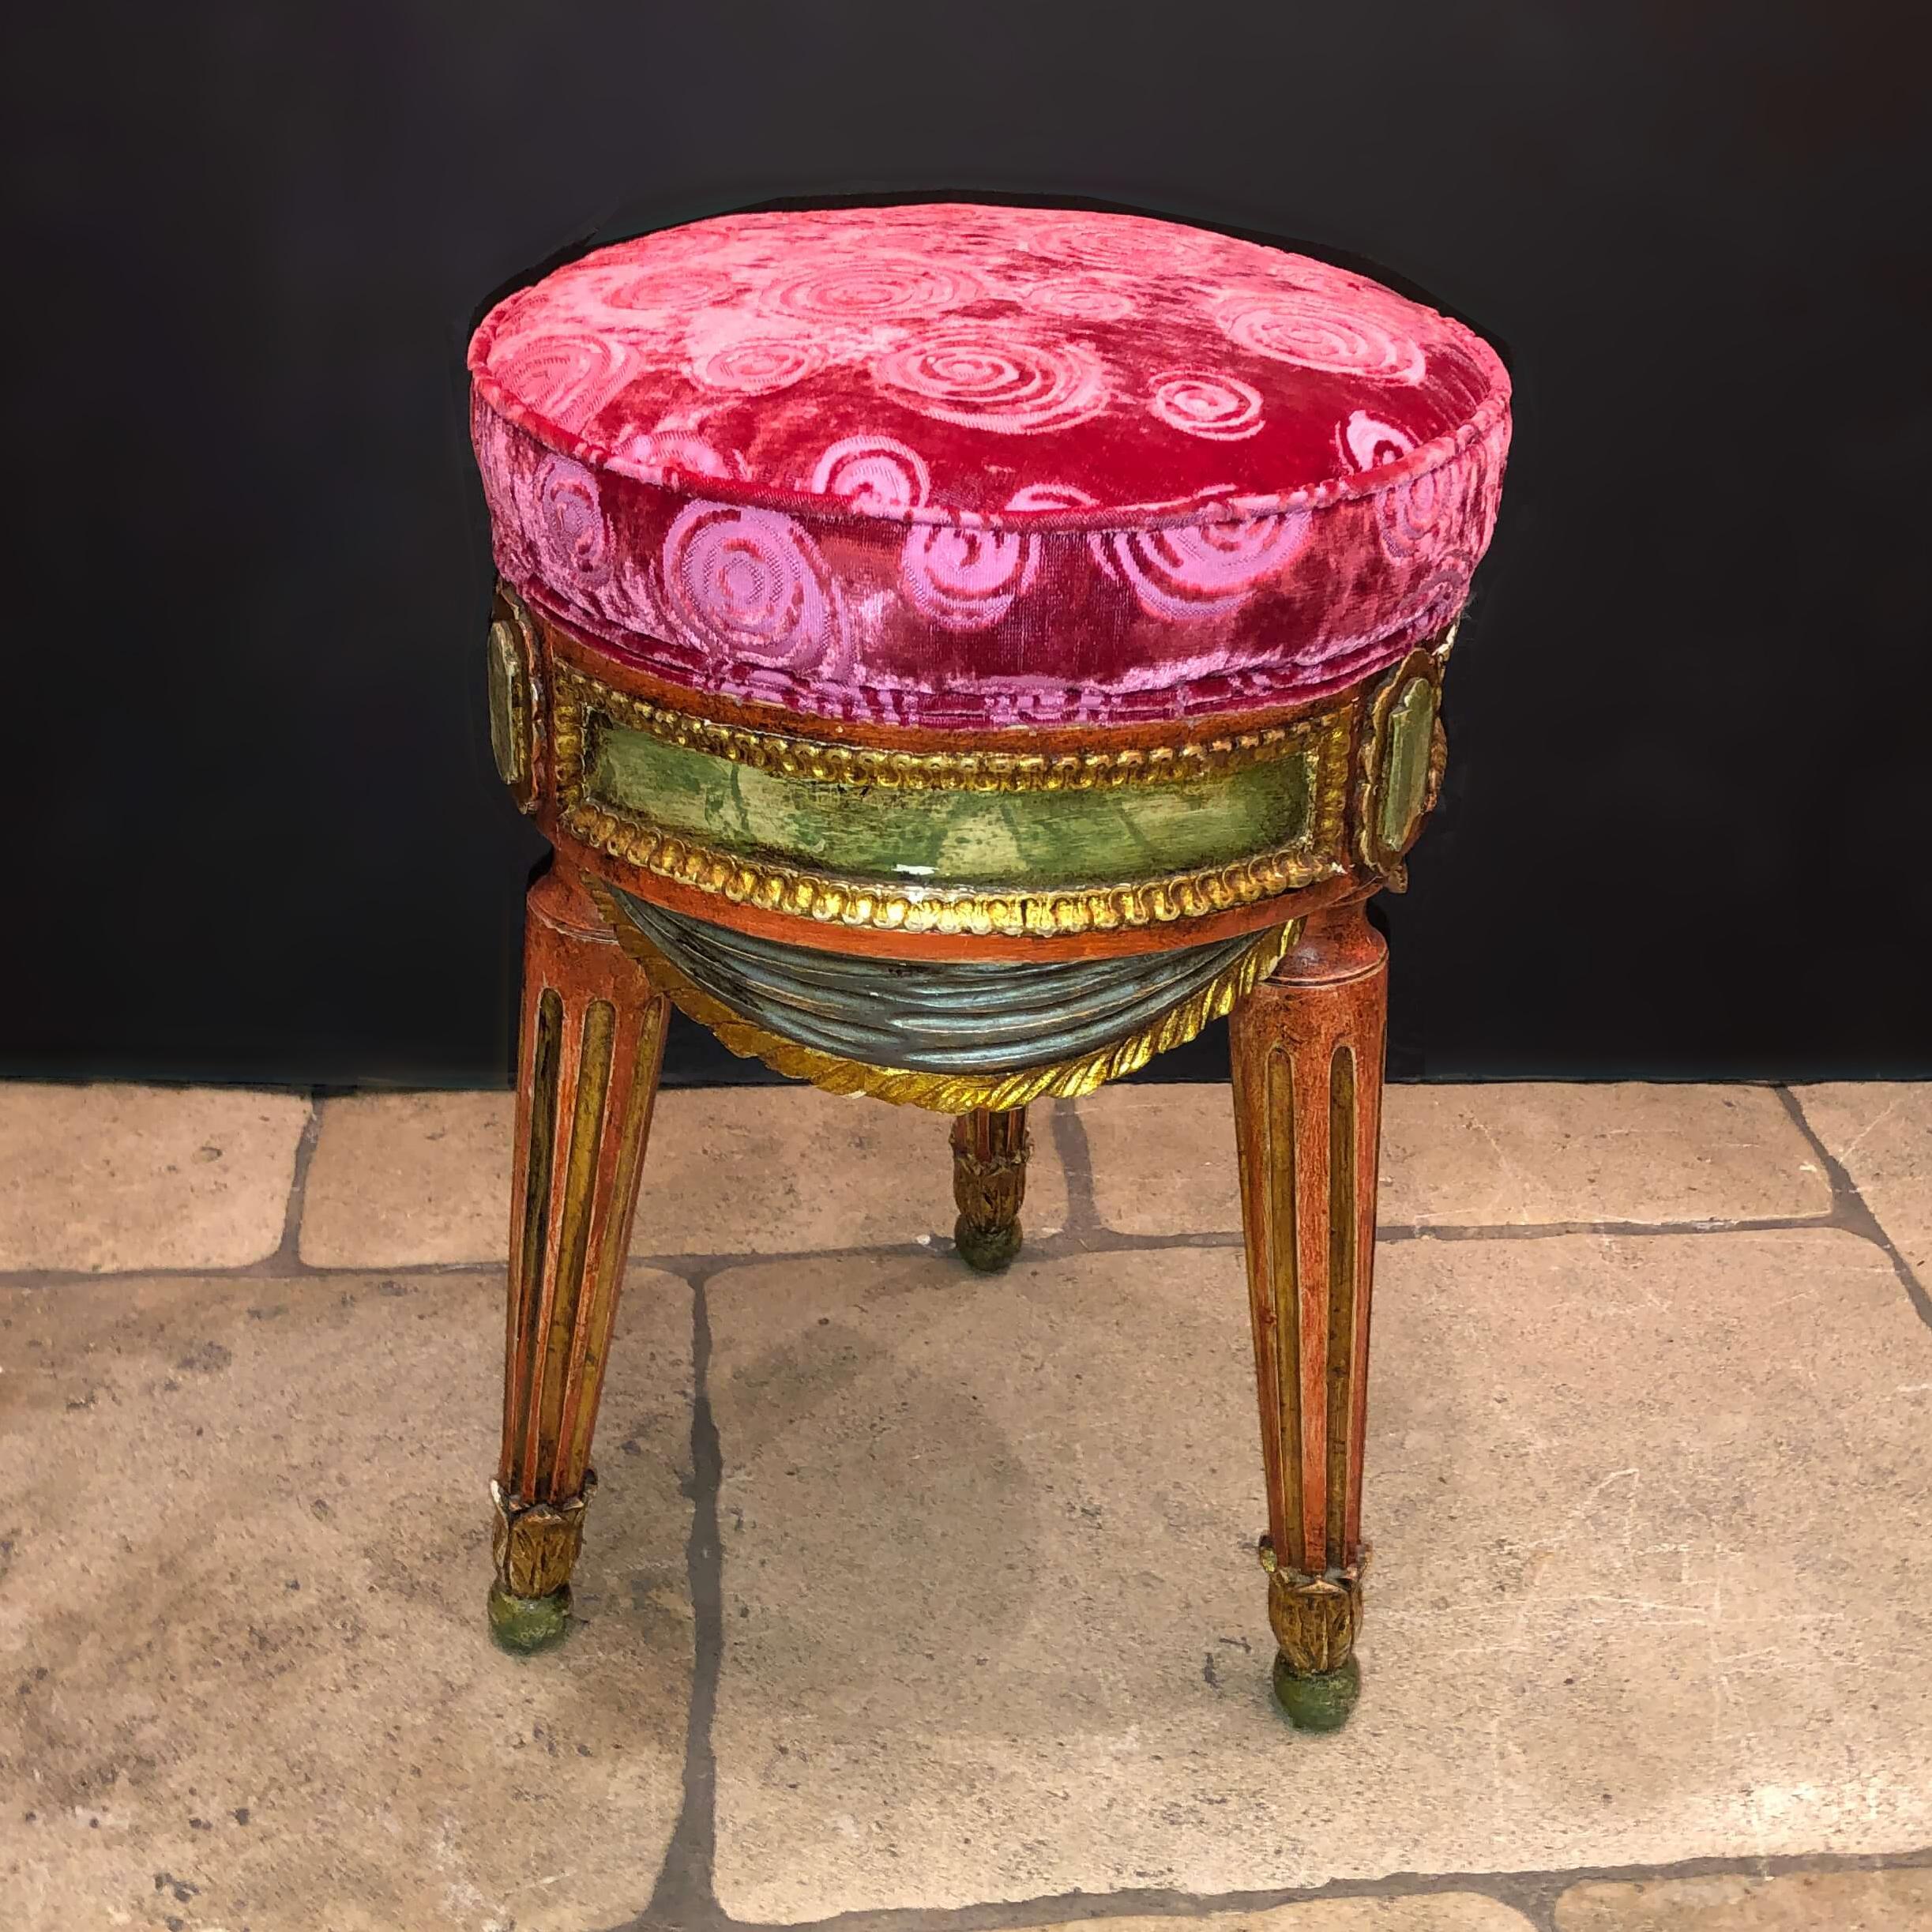 An Italian hand painted round Louis XVI style Tabouret stool, with a velvet upholstered boxed cushion seat, gilt trim, carved drapery on out-flaring turned, tapered and fluted legs, late 19th century.